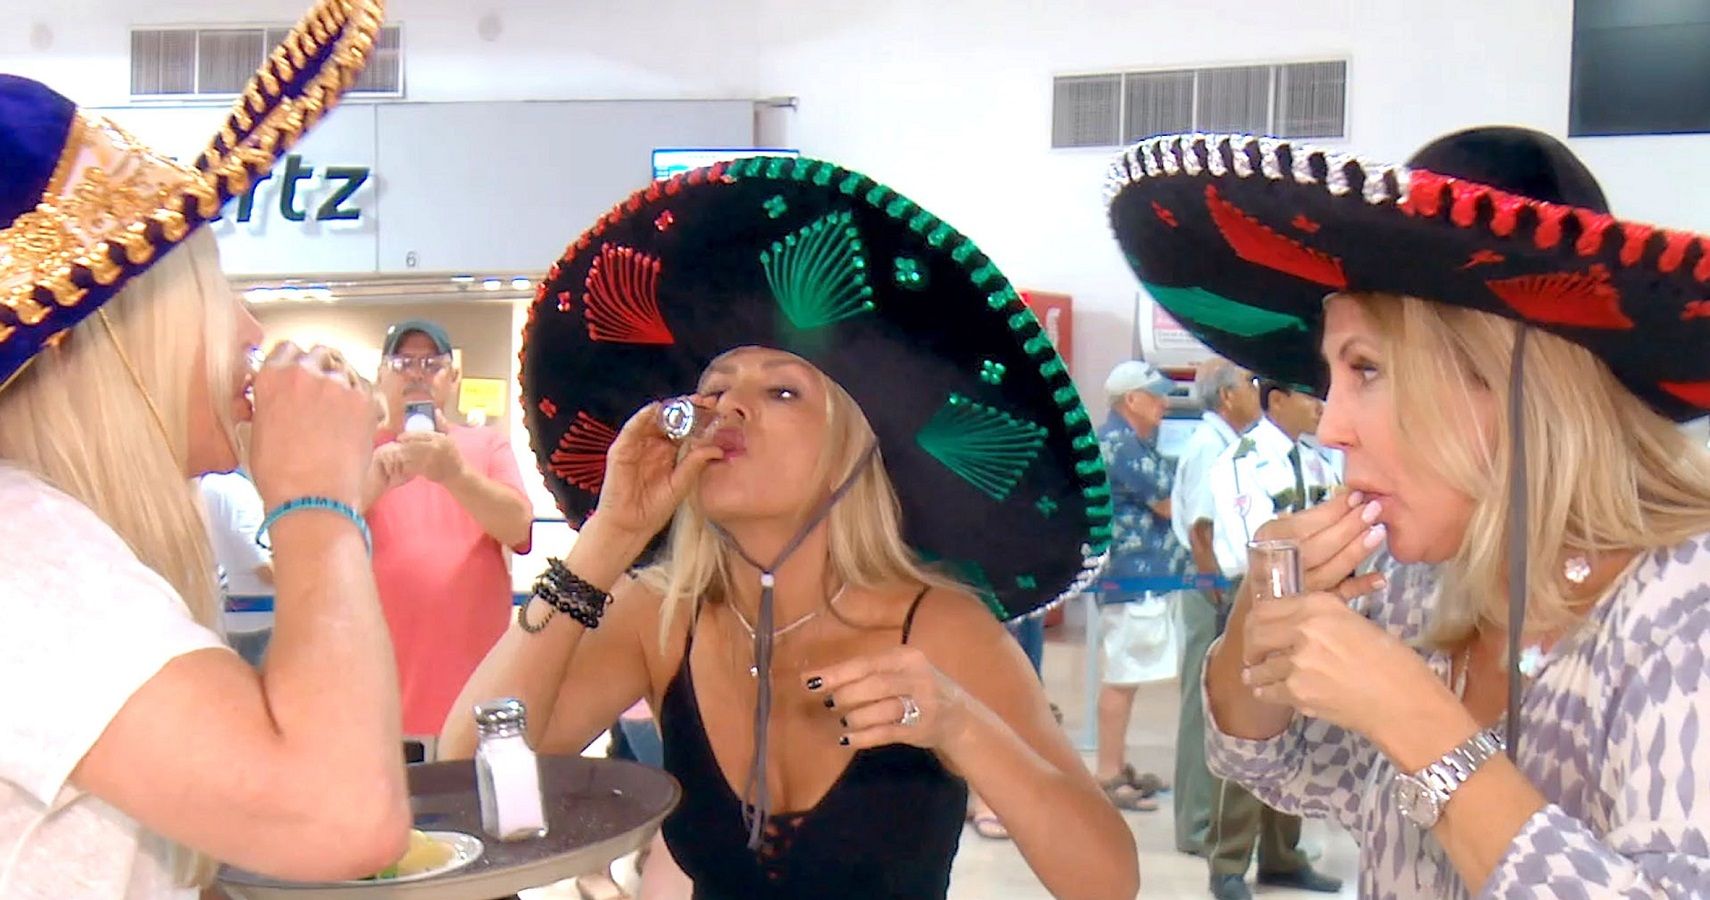 The women from RHOC drinking tequila in Mexico